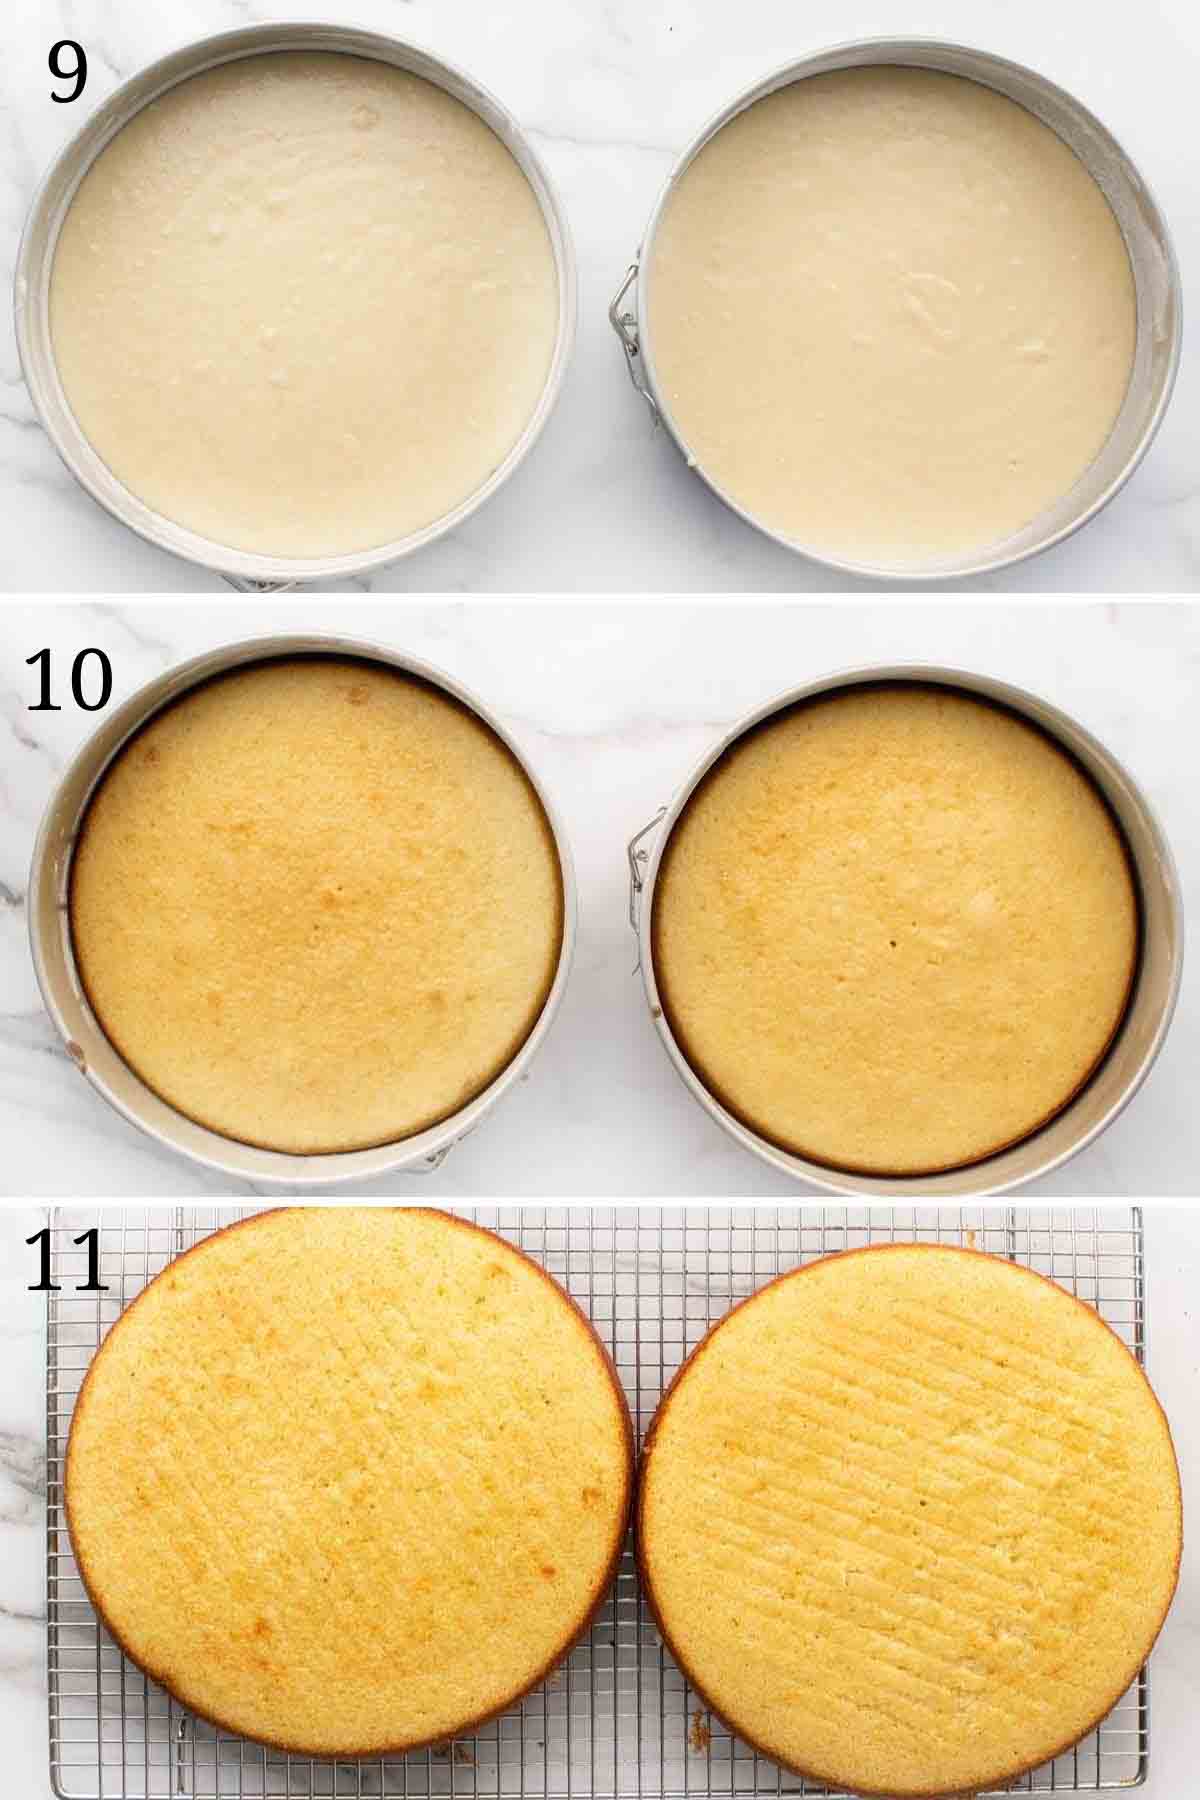 three images showing the process of baking the cake layers